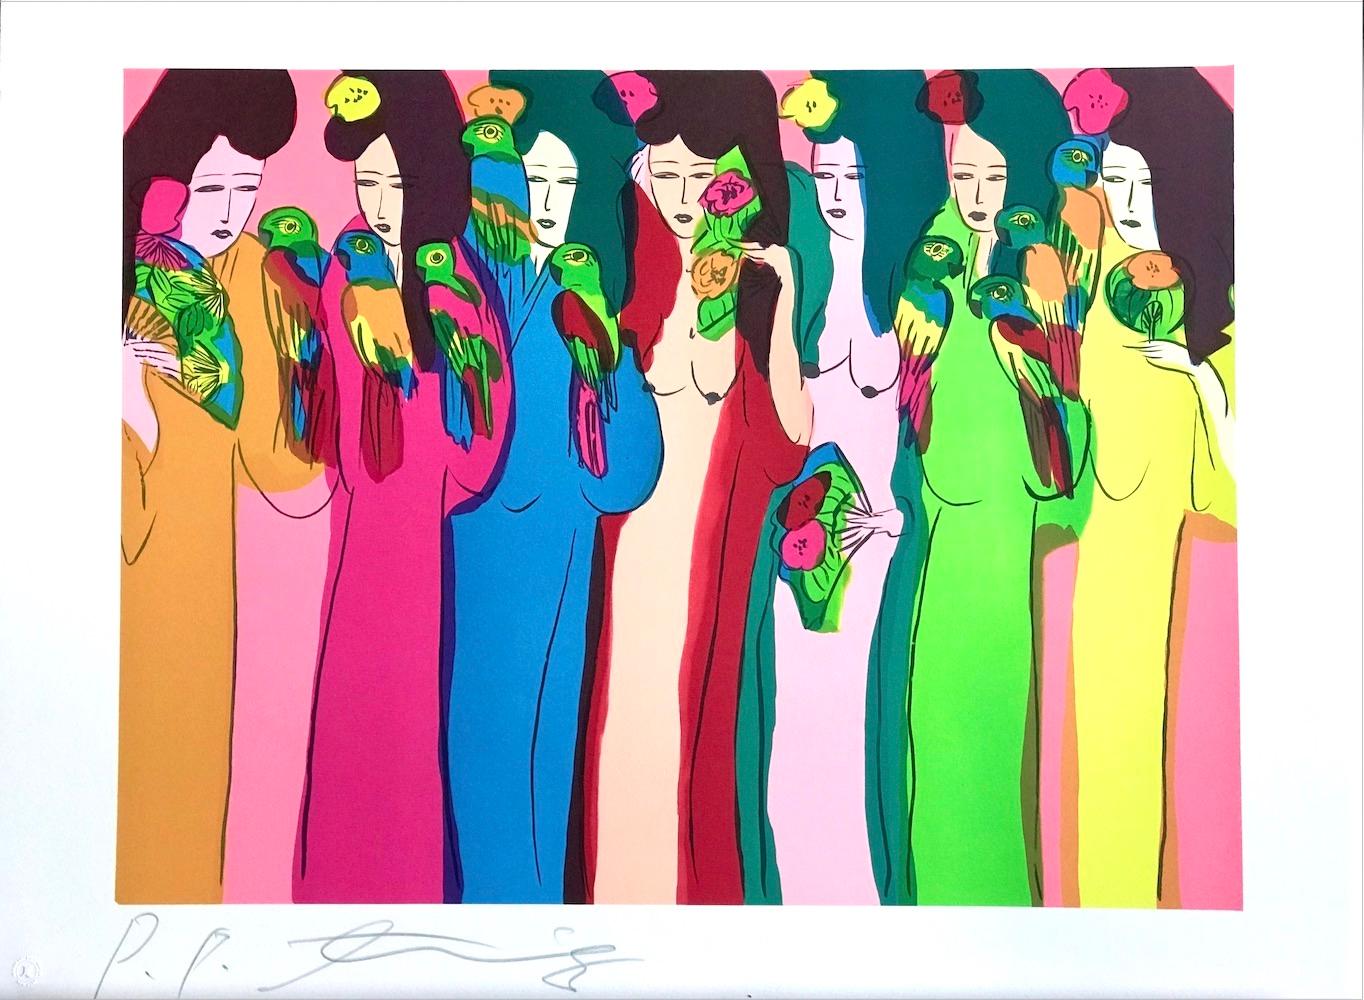 LADIES WITH PARROTS Signed Lithograph, Asian Women, Birds, Fans, Kimonos - Contemporary Print by Walasse Ting